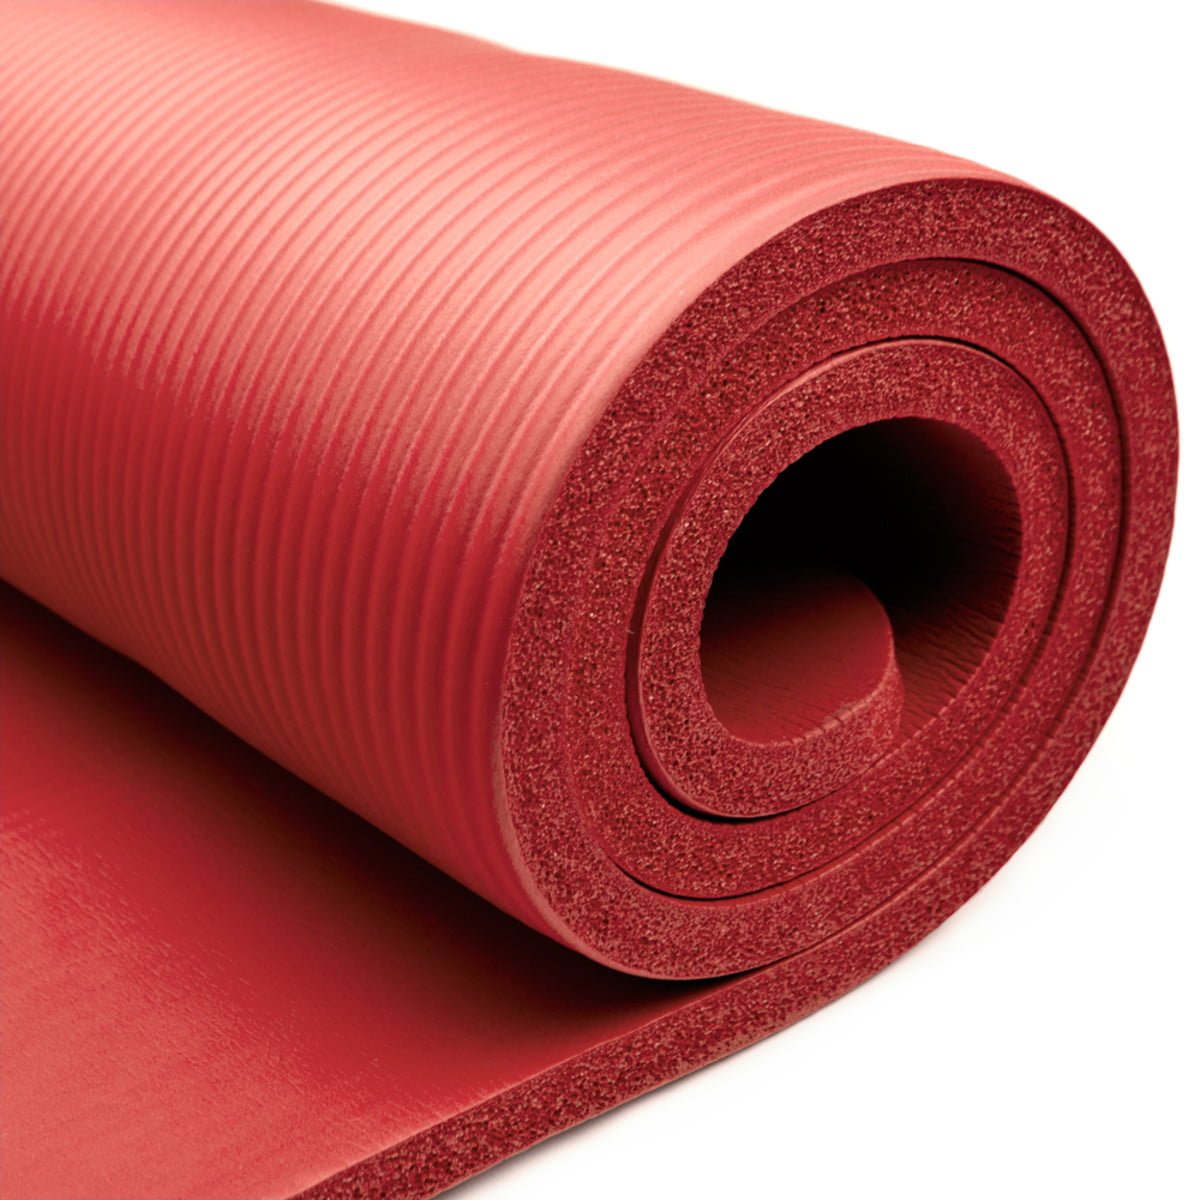 red yoga mat 3 4 inch 2